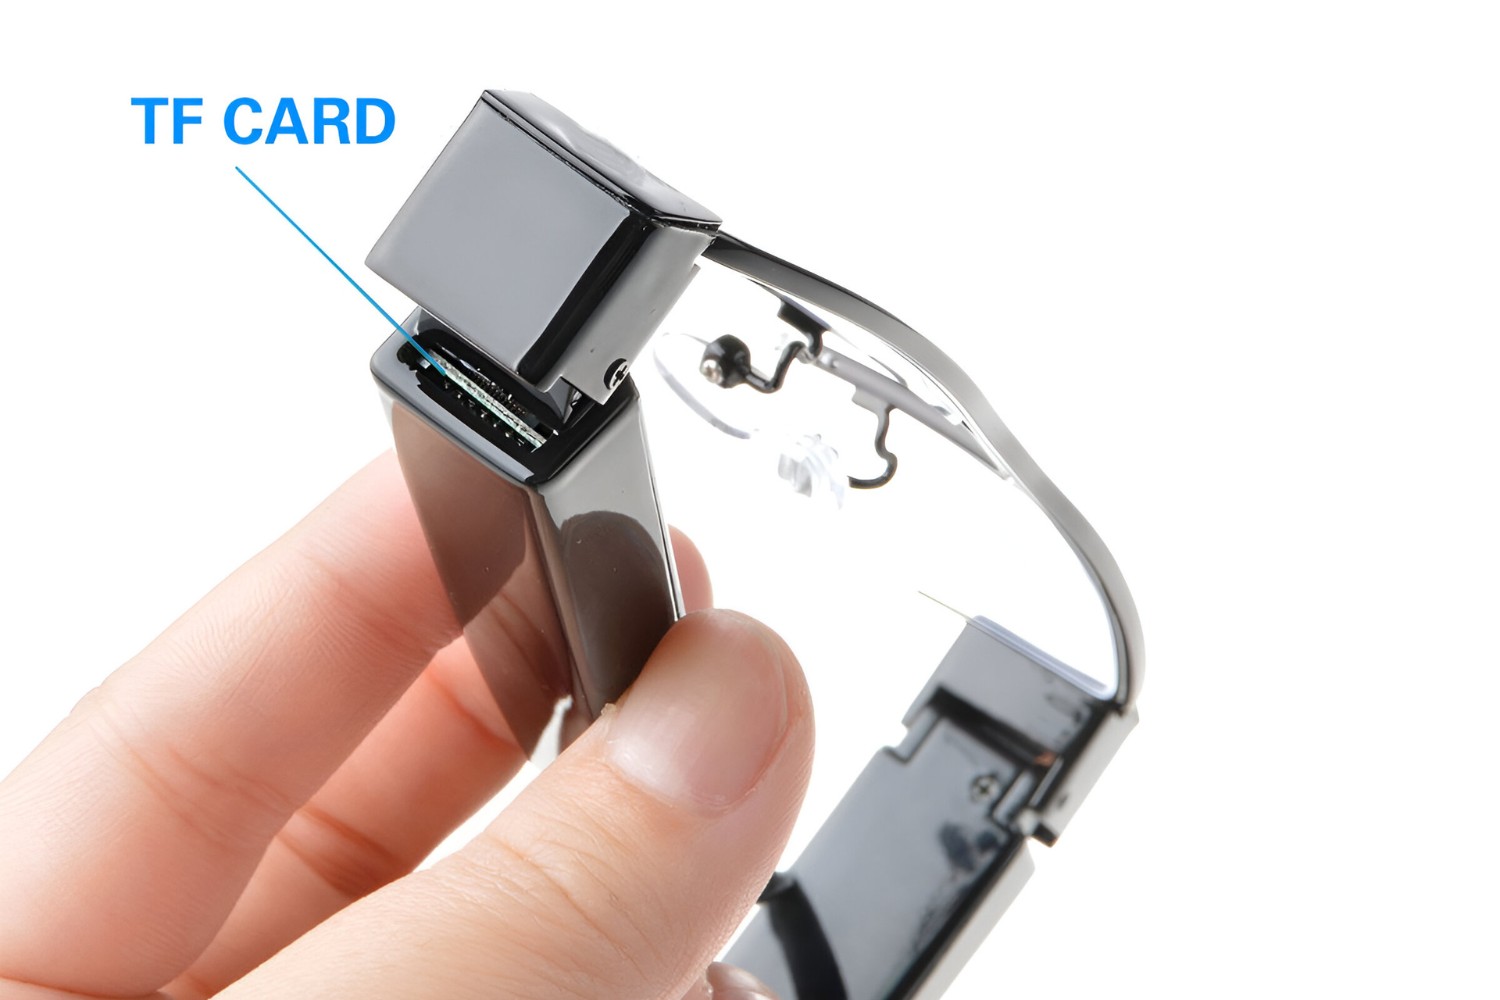 hd-camcorder-glasses-camera-dvr-digital-video-recorder-eyewear-how-to-put-tf-card-in